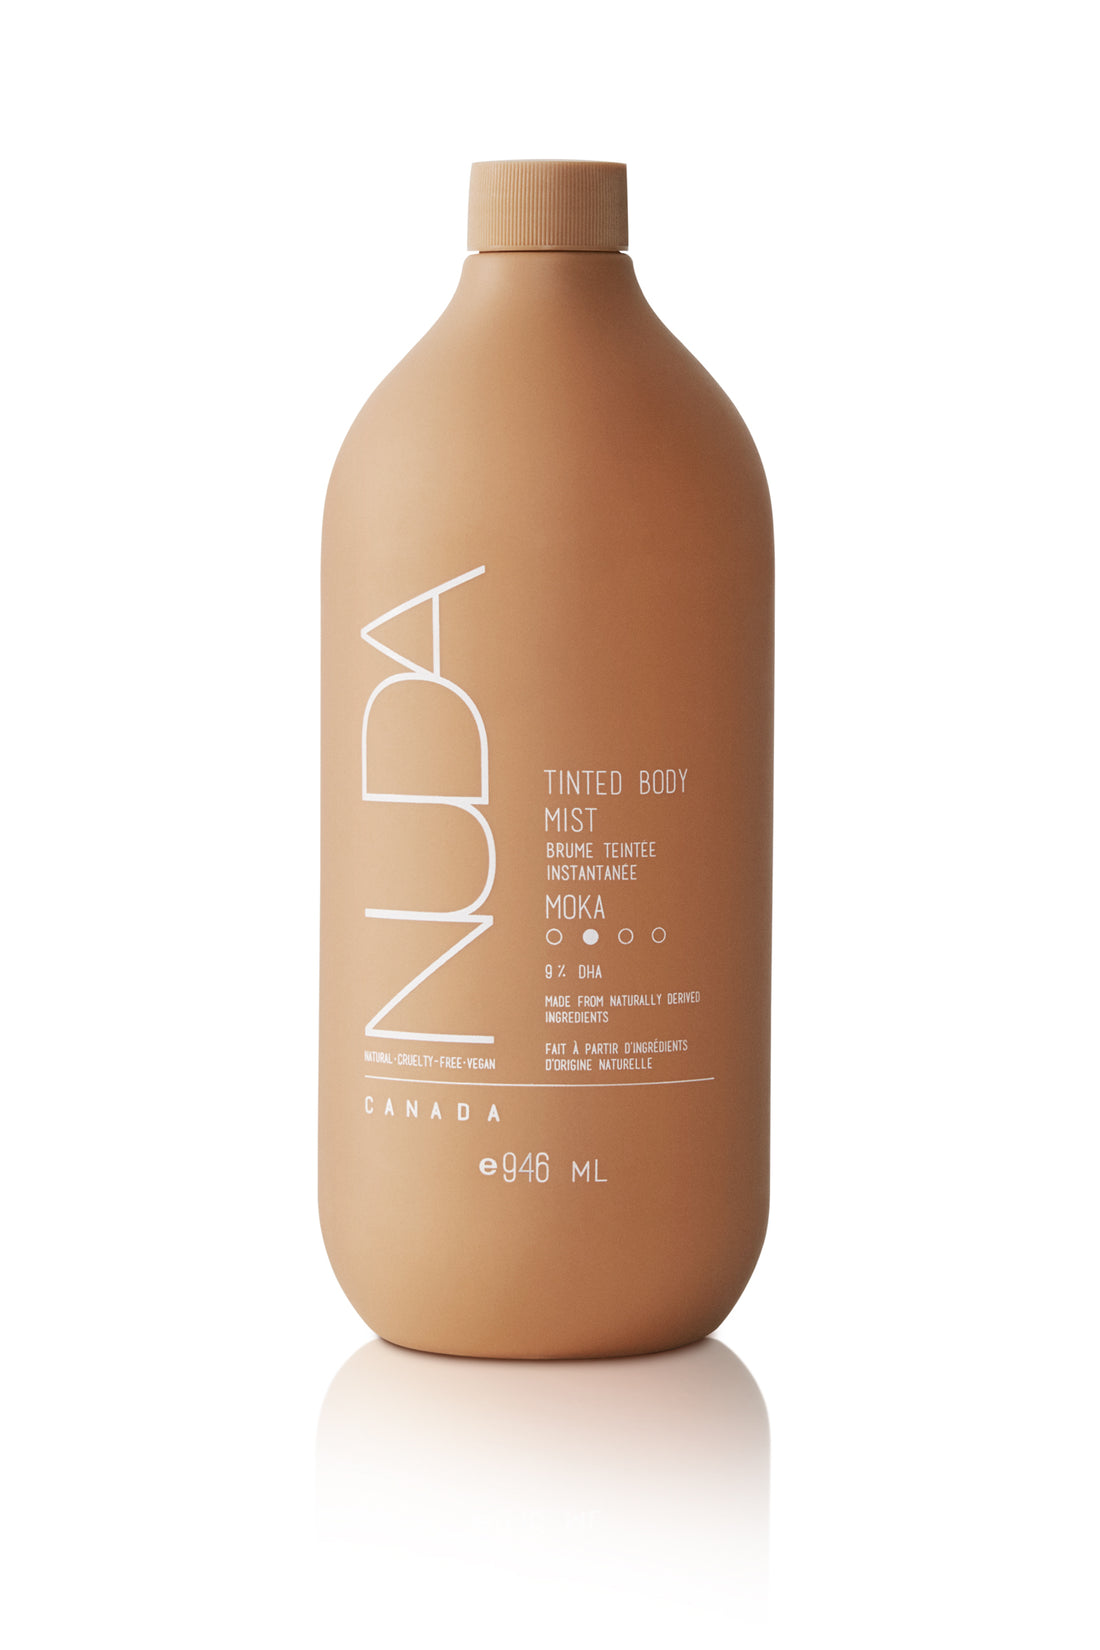 Edgemont A sleek, matte bronze-colored bottle labeled "nuda tinted body mist" with product details and branding on a clean, white background. North Vancouver